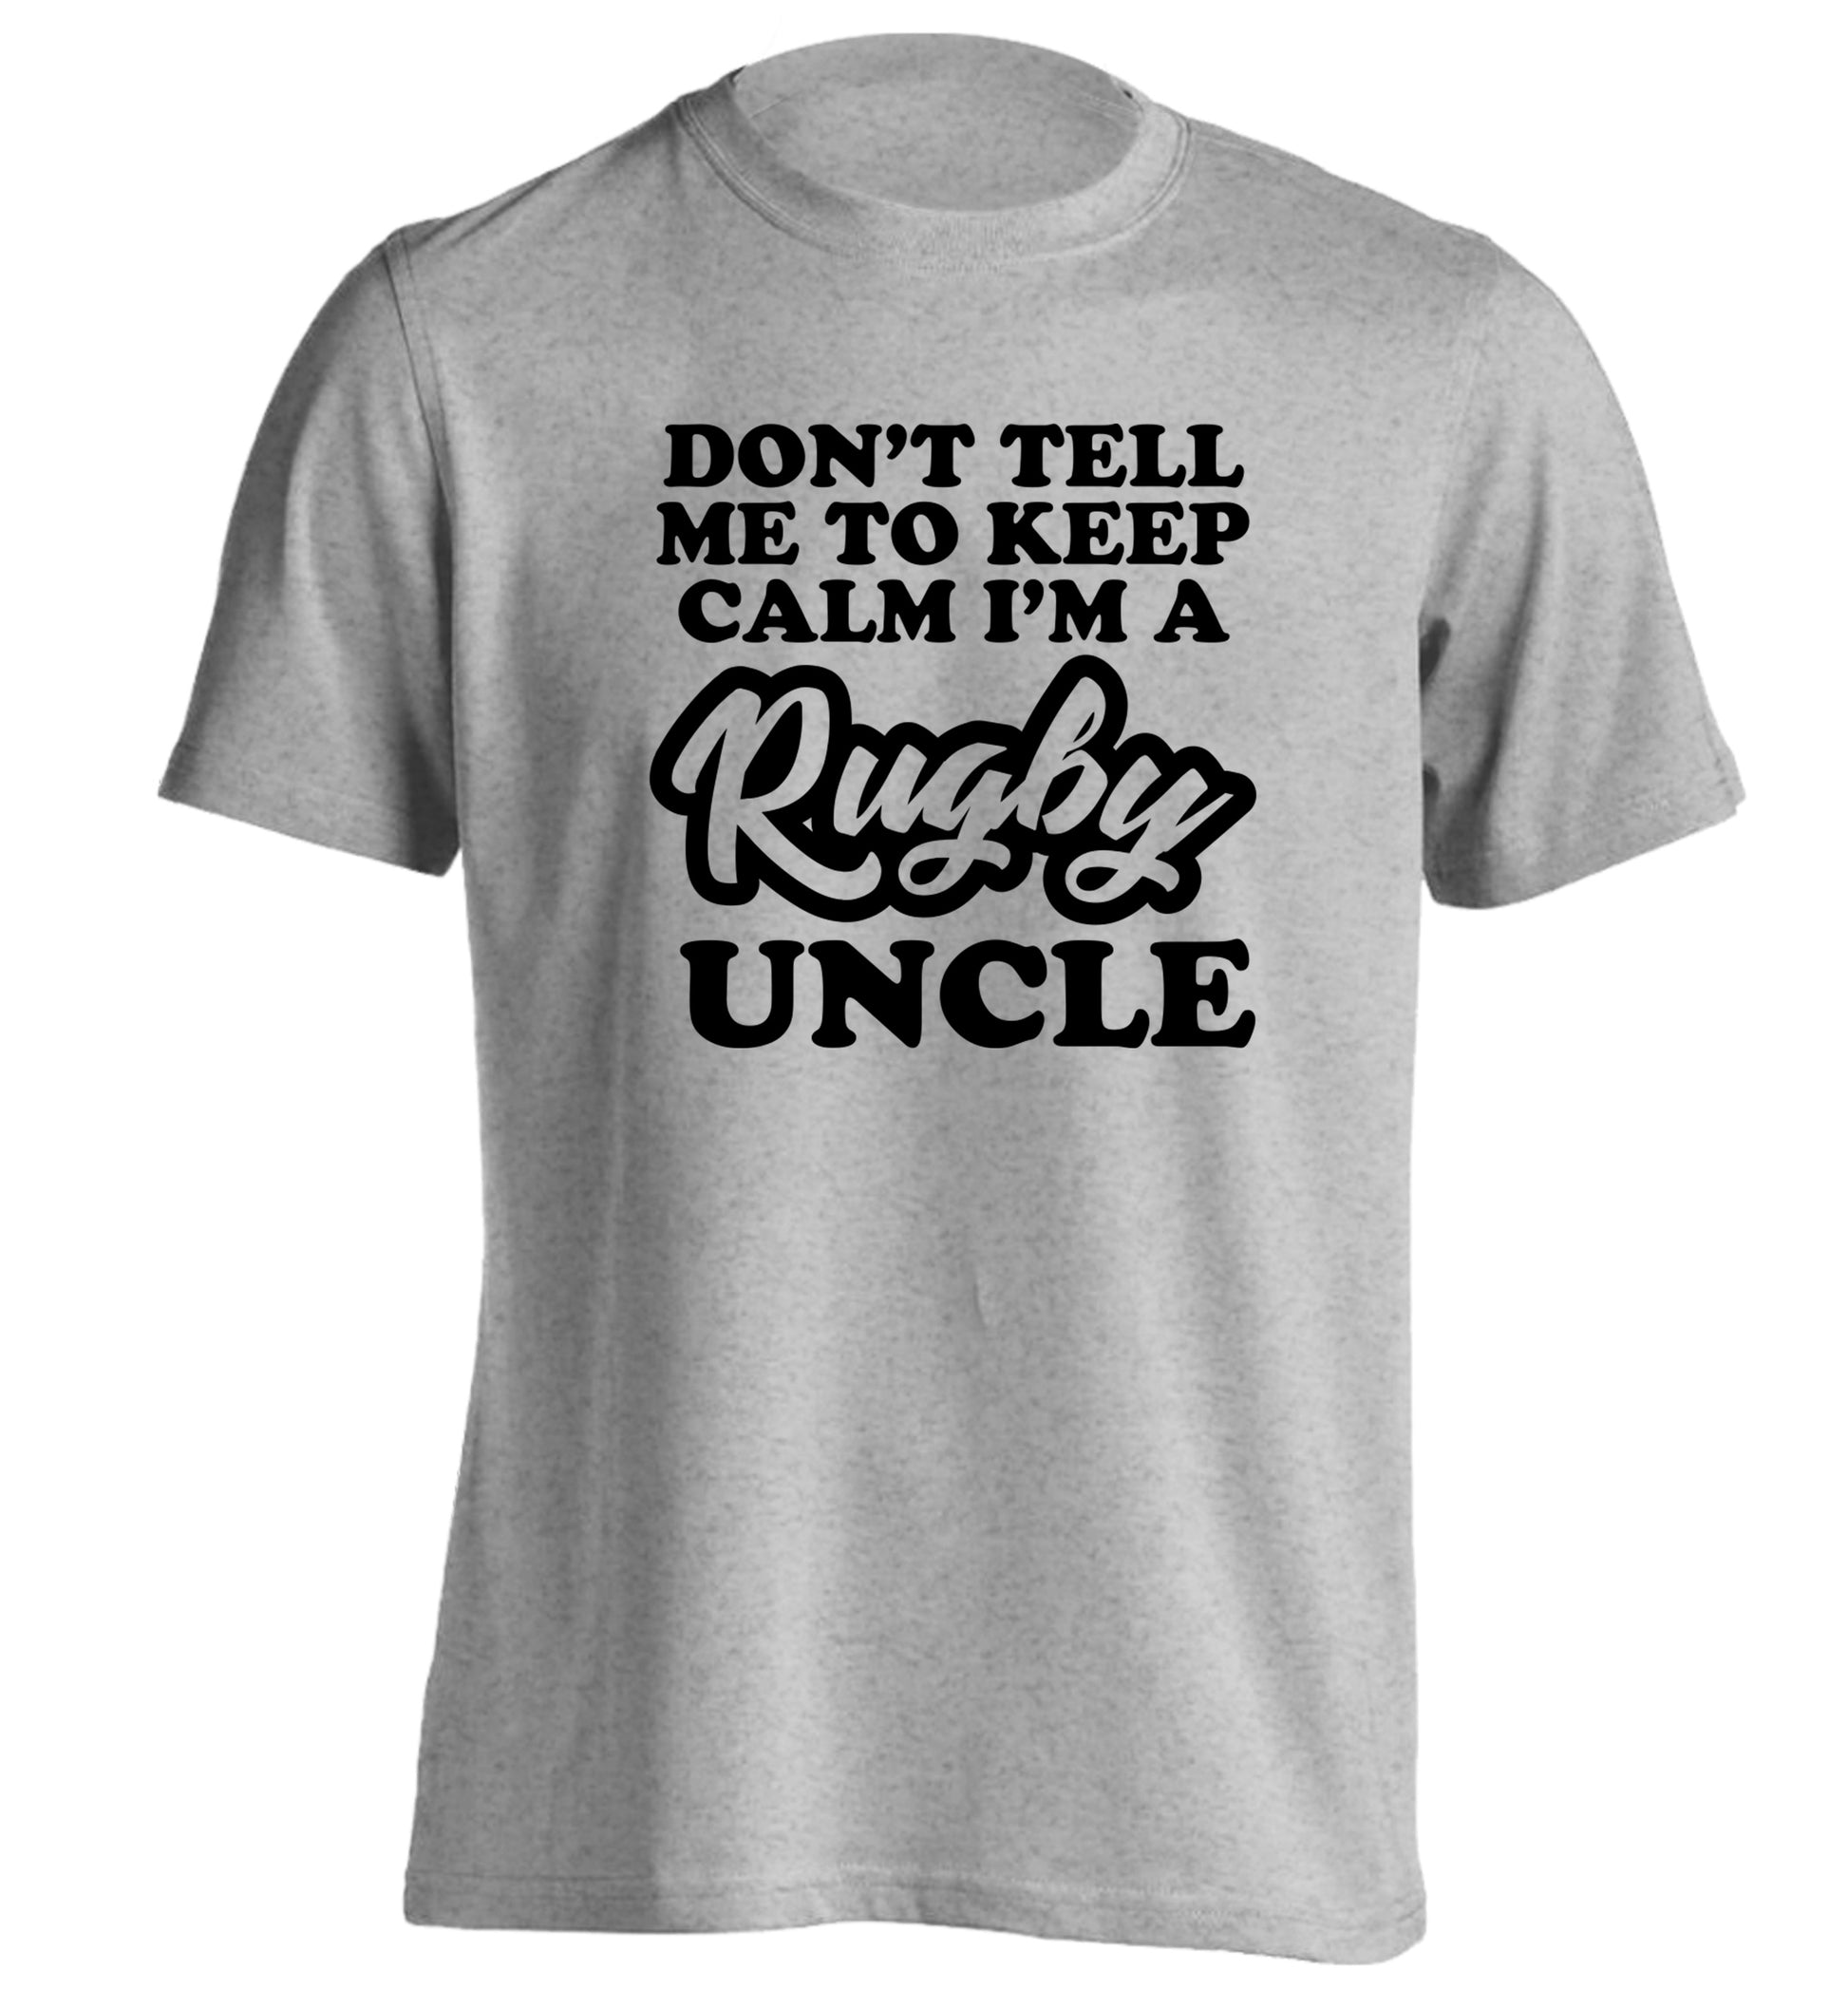 Don't tell me to keep calm I'm a rugby uncle adults unisex grey Tshirt 2XL